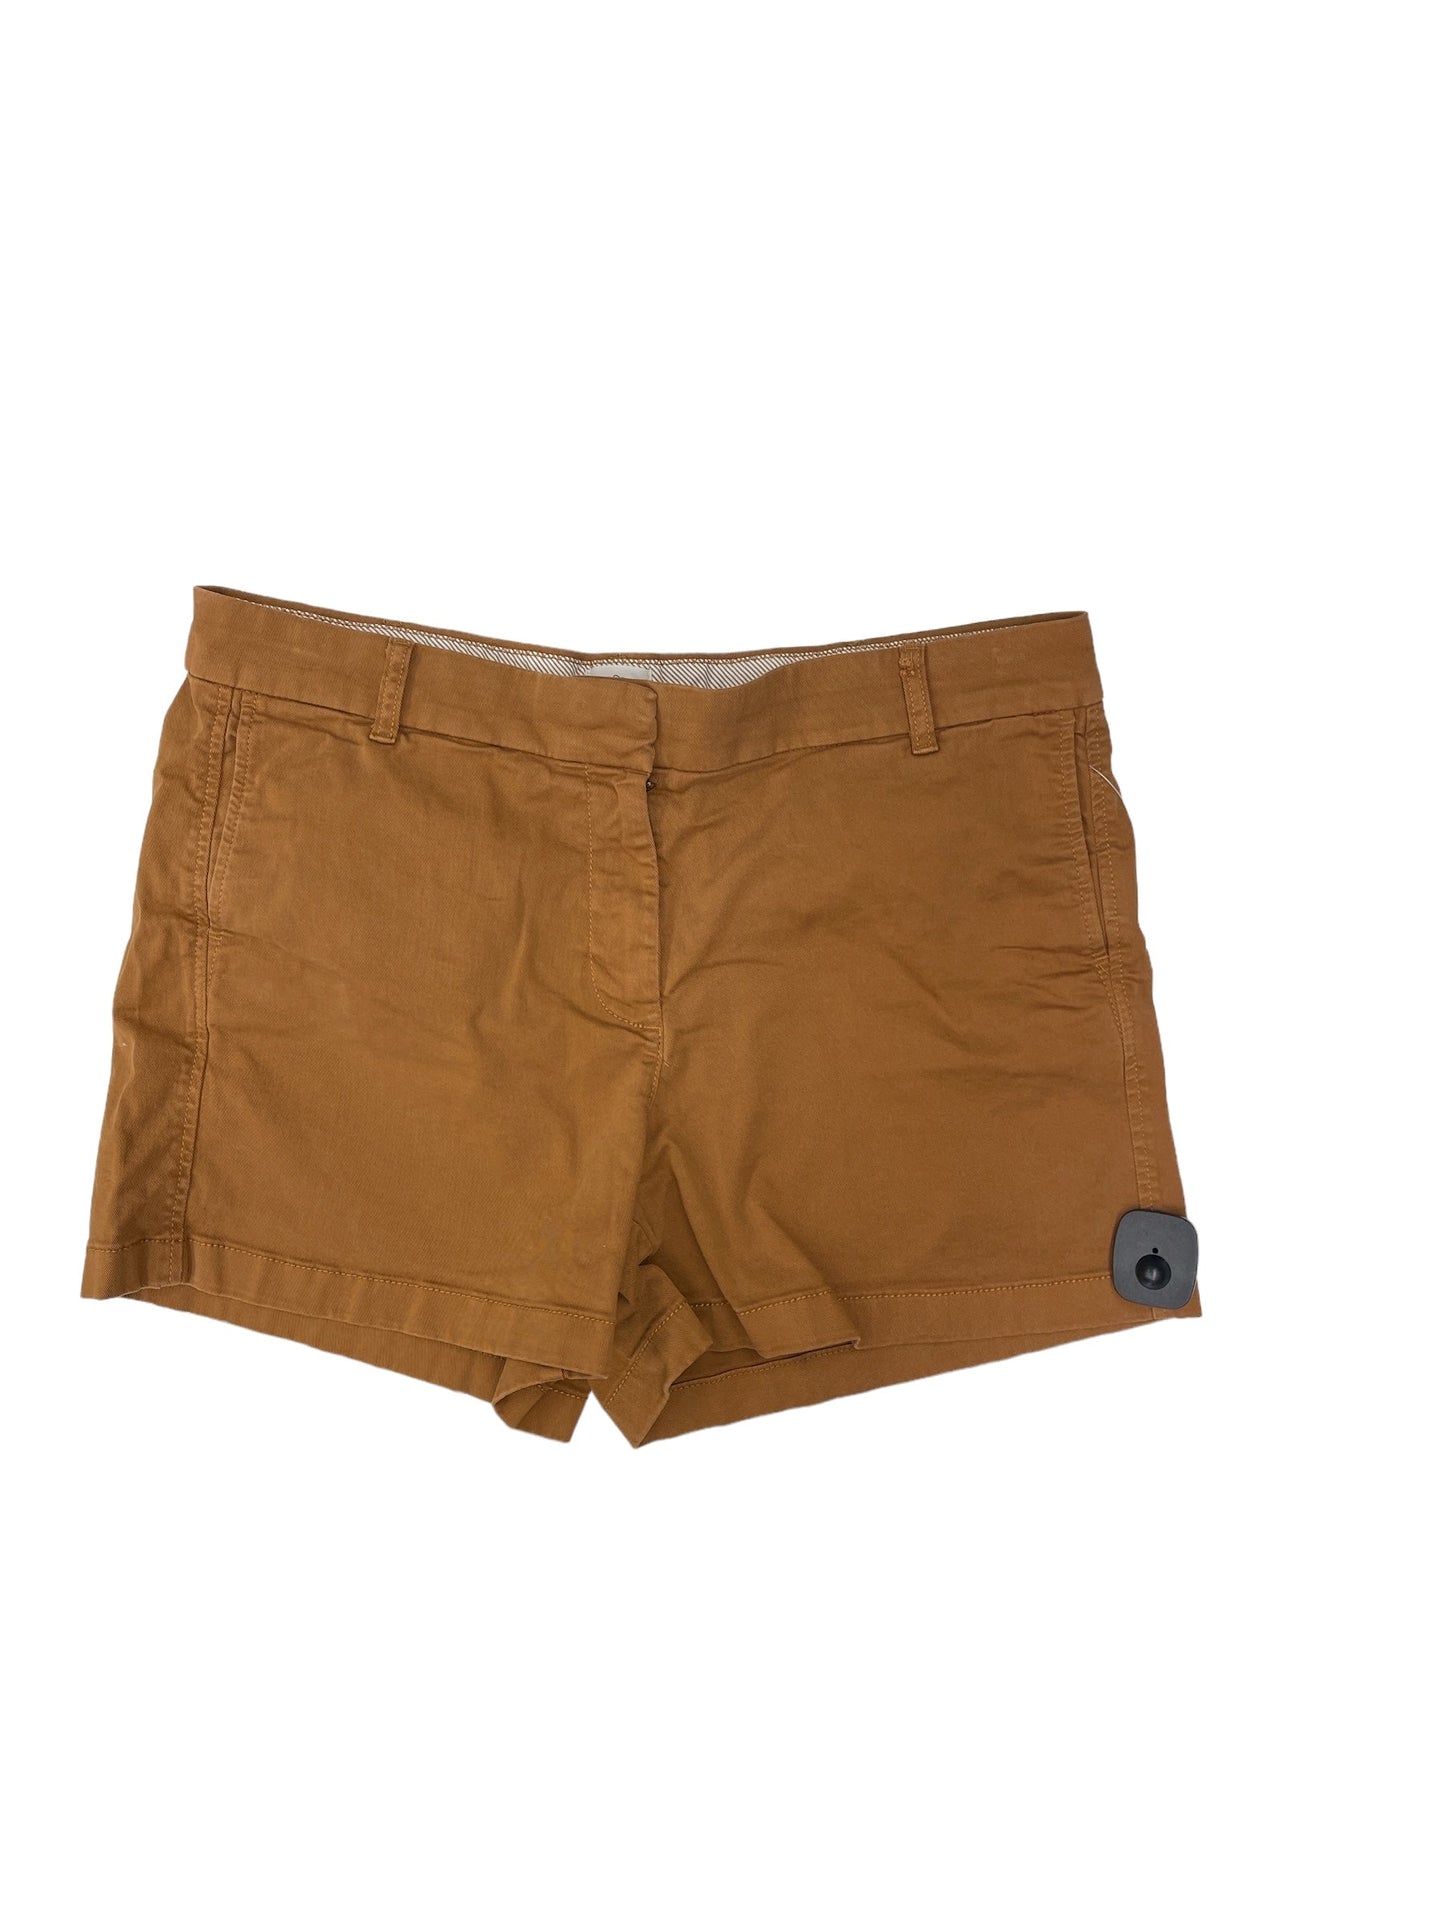 Shorts By J. Crew  Size: 14